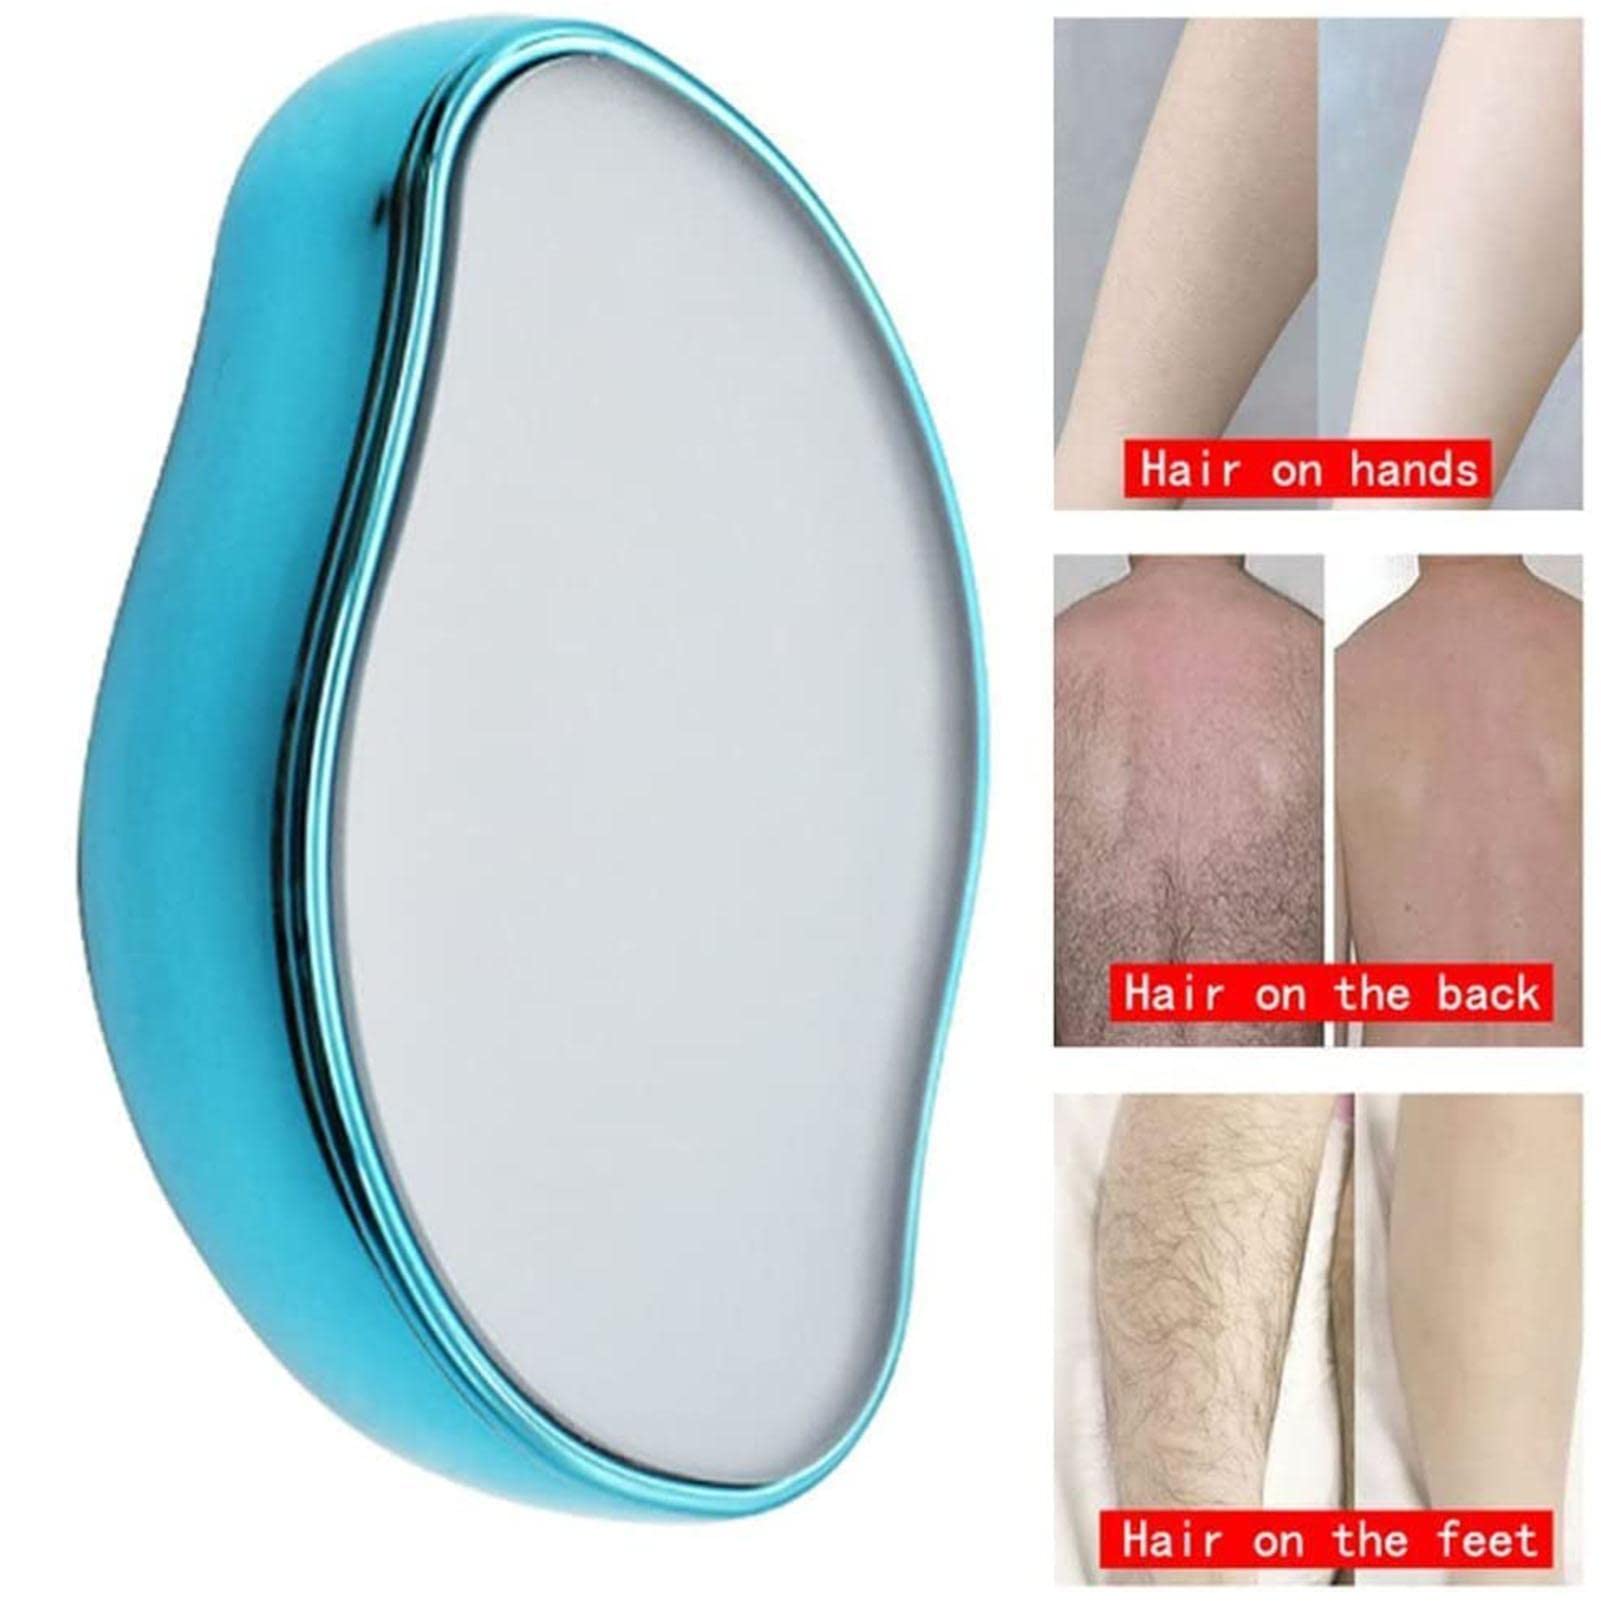 N/A/A Crystal Hair Eraser for Women and Men, Painless Hair Removal&Skin Exfoliator Tool, New Crystal Hair Eraser, Portable Mild Epilator,for Men & Women All Body Parts